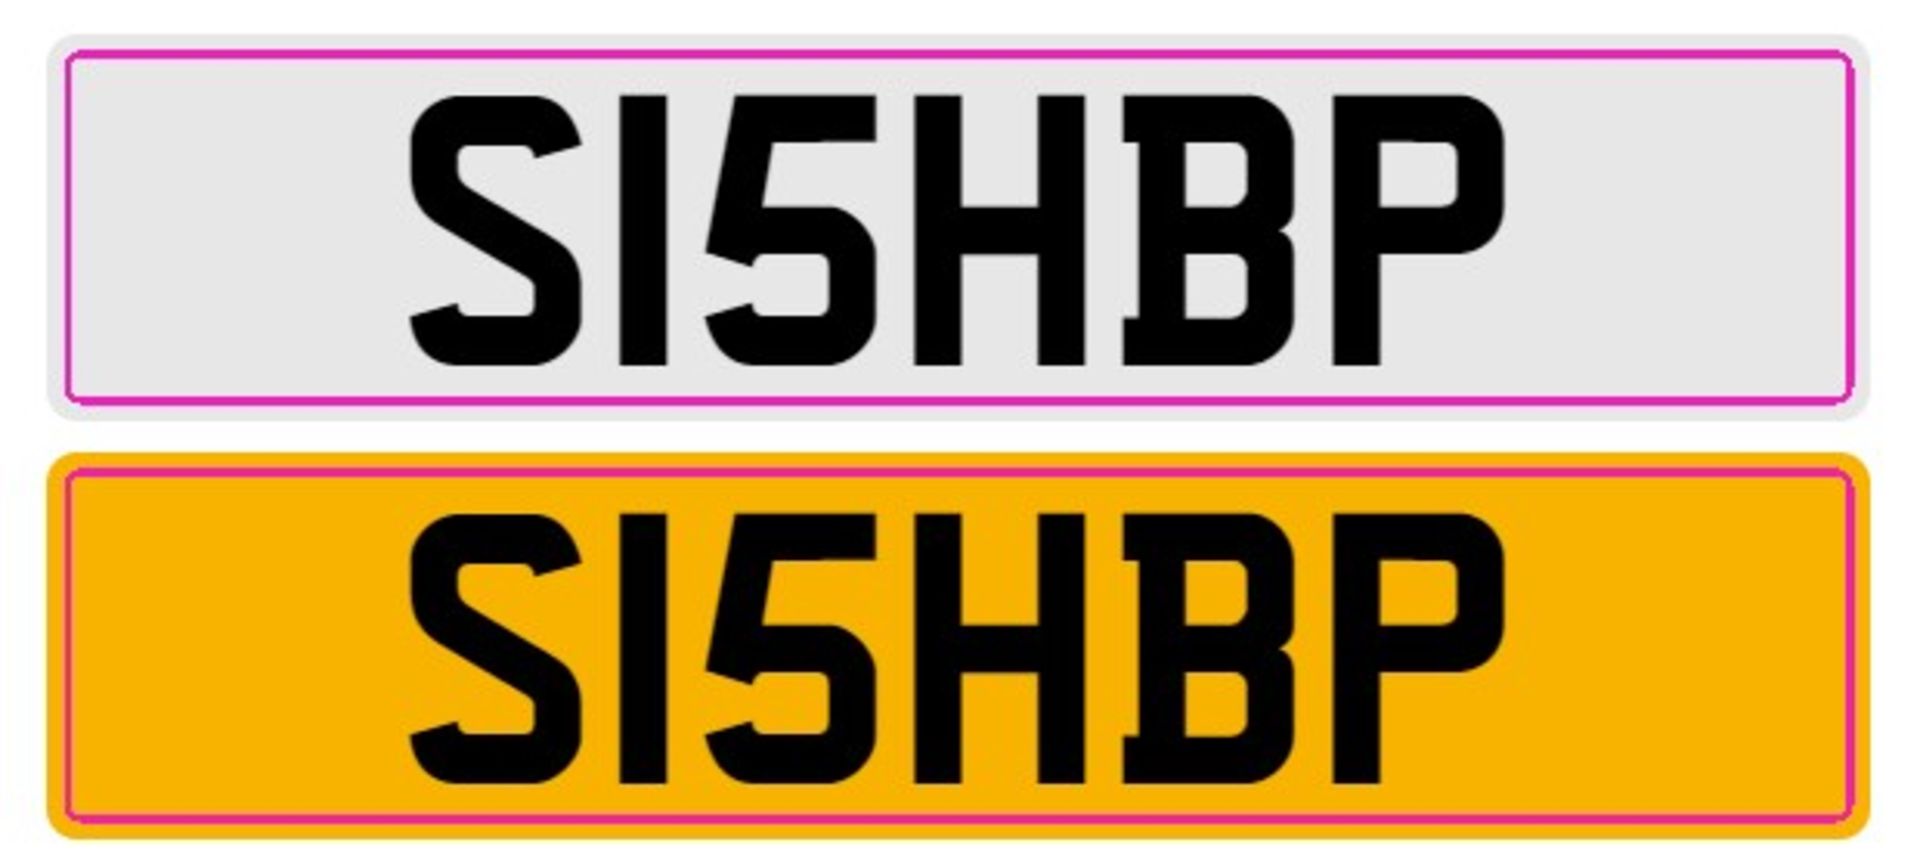 Cherished registration number.: .S15HBP An administration fee of £80 + VAT will be added to the sale